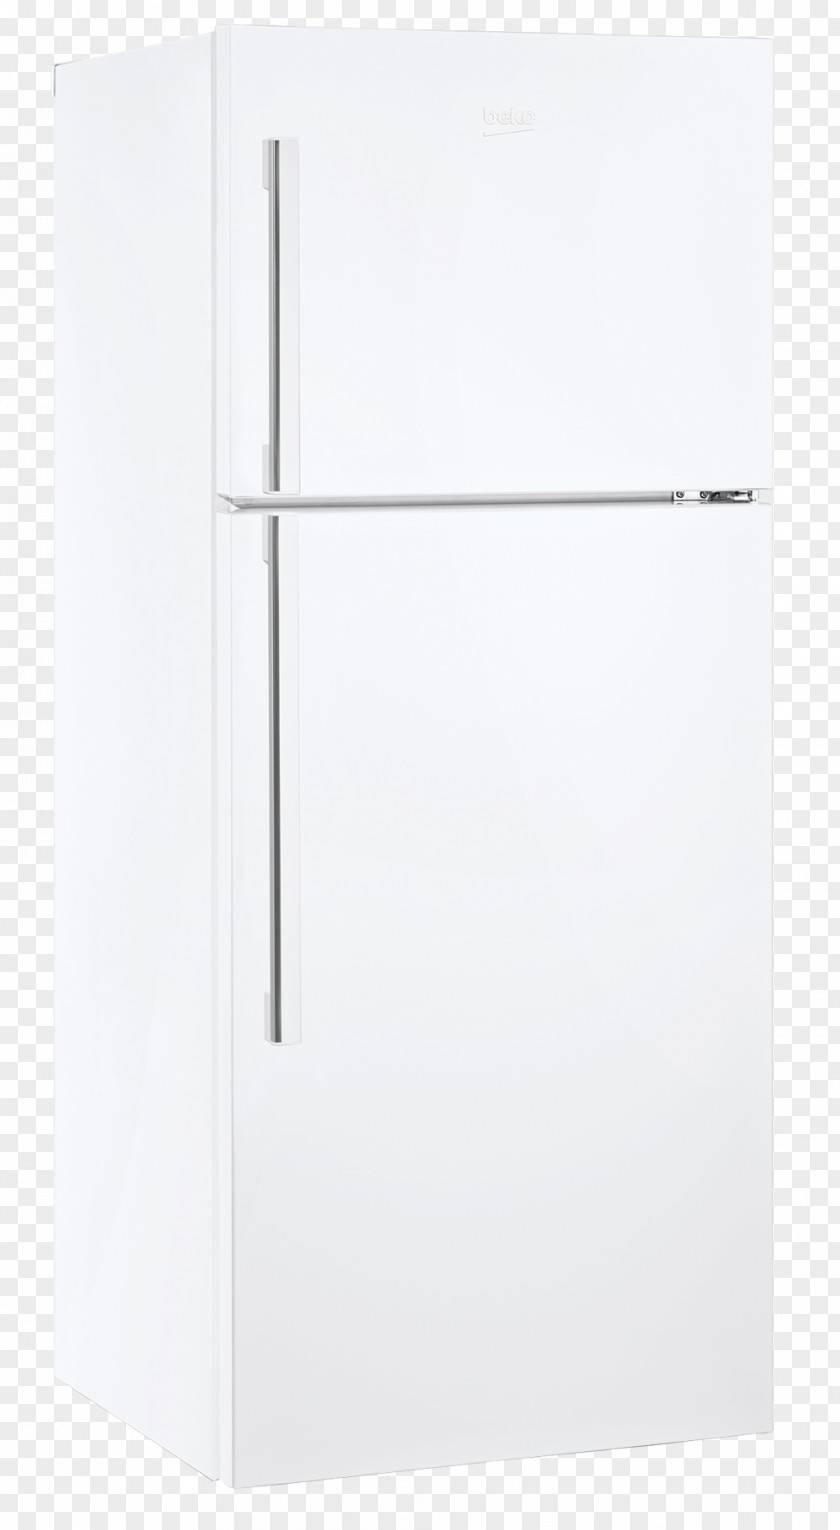 Double Door Refrigerator Auto-defrost Home Appliance Drawer Refrigeration PNG